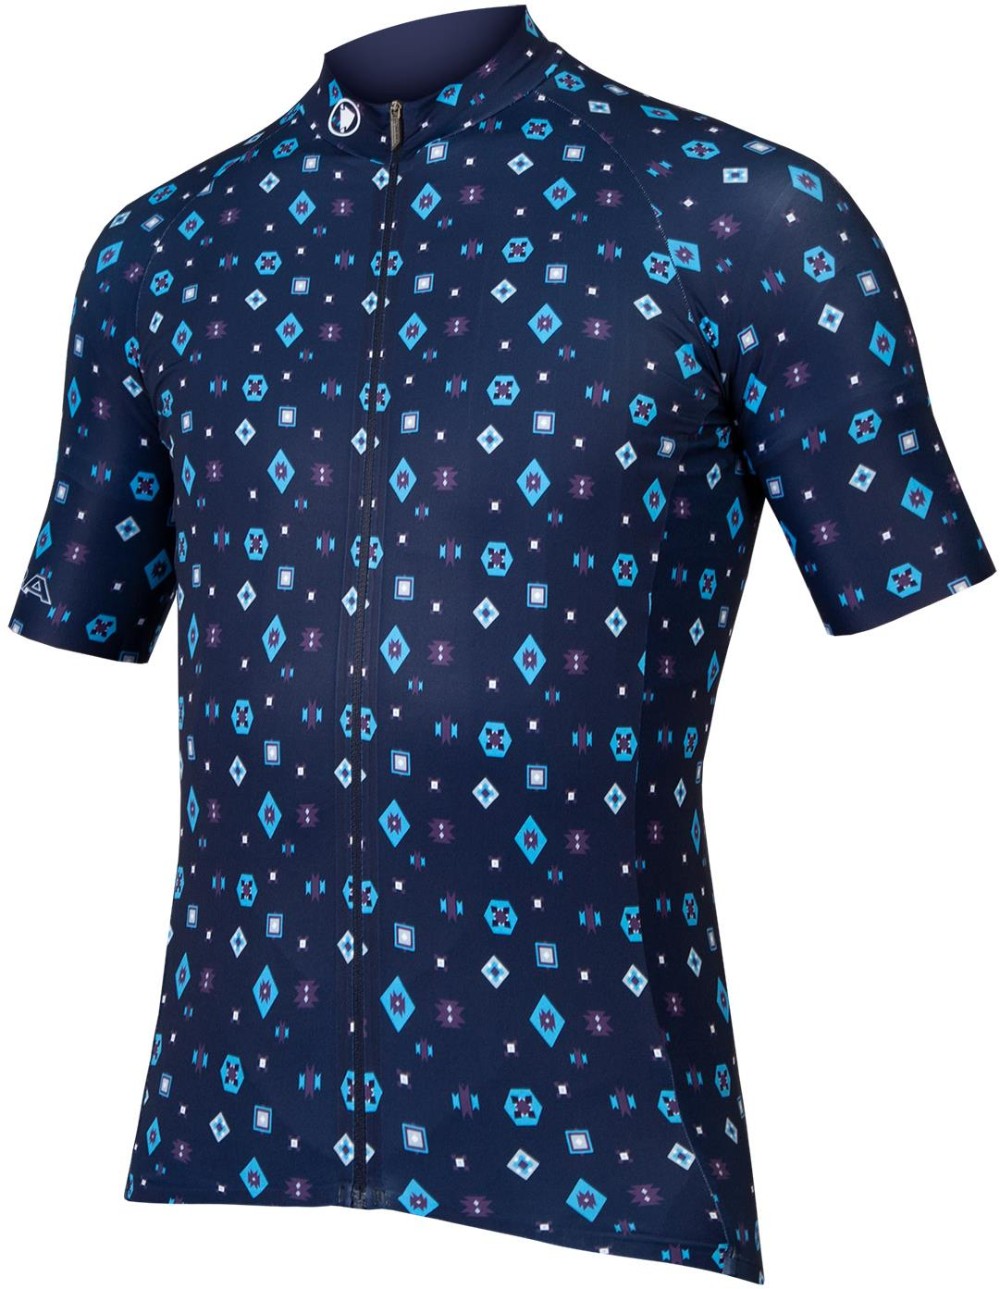 Supercraft Short Sleeve Cycling Jersey Limited Edition image 0